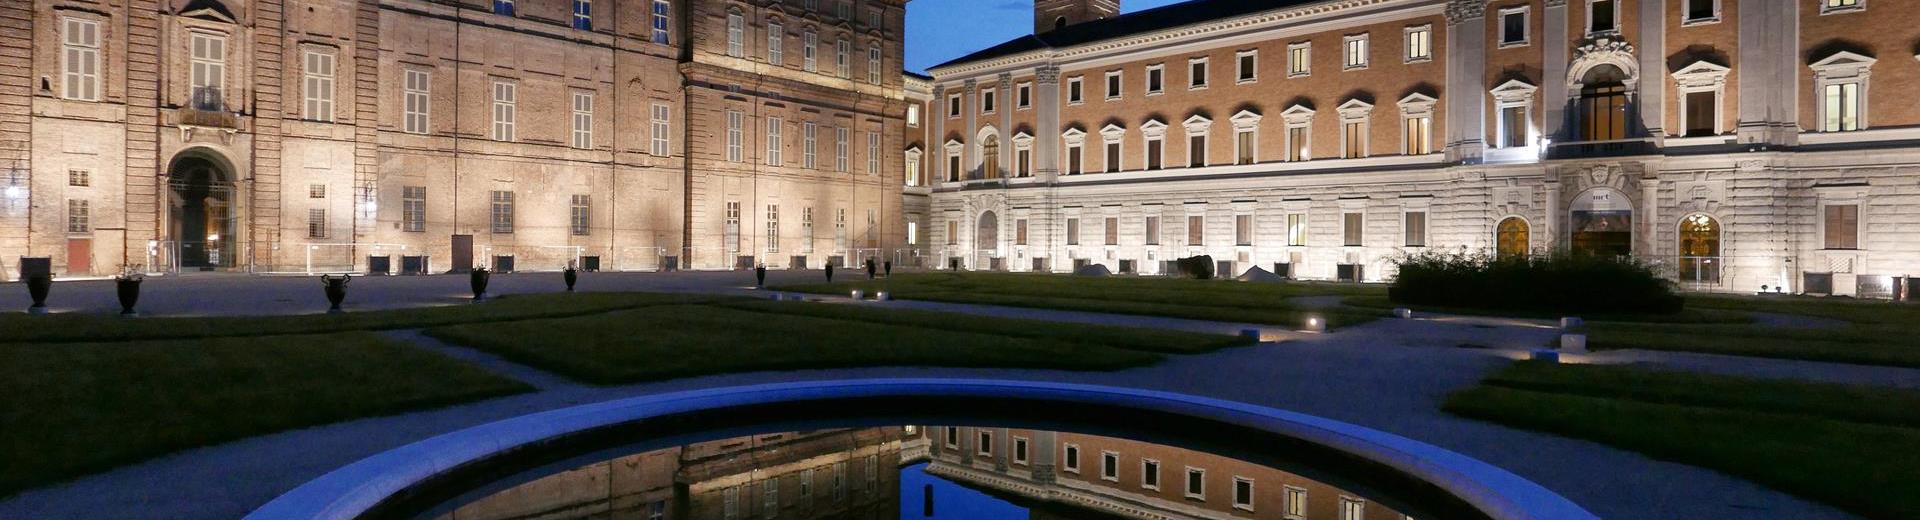 Book the BW Plus Hotel Genoa to attend events in Turin!